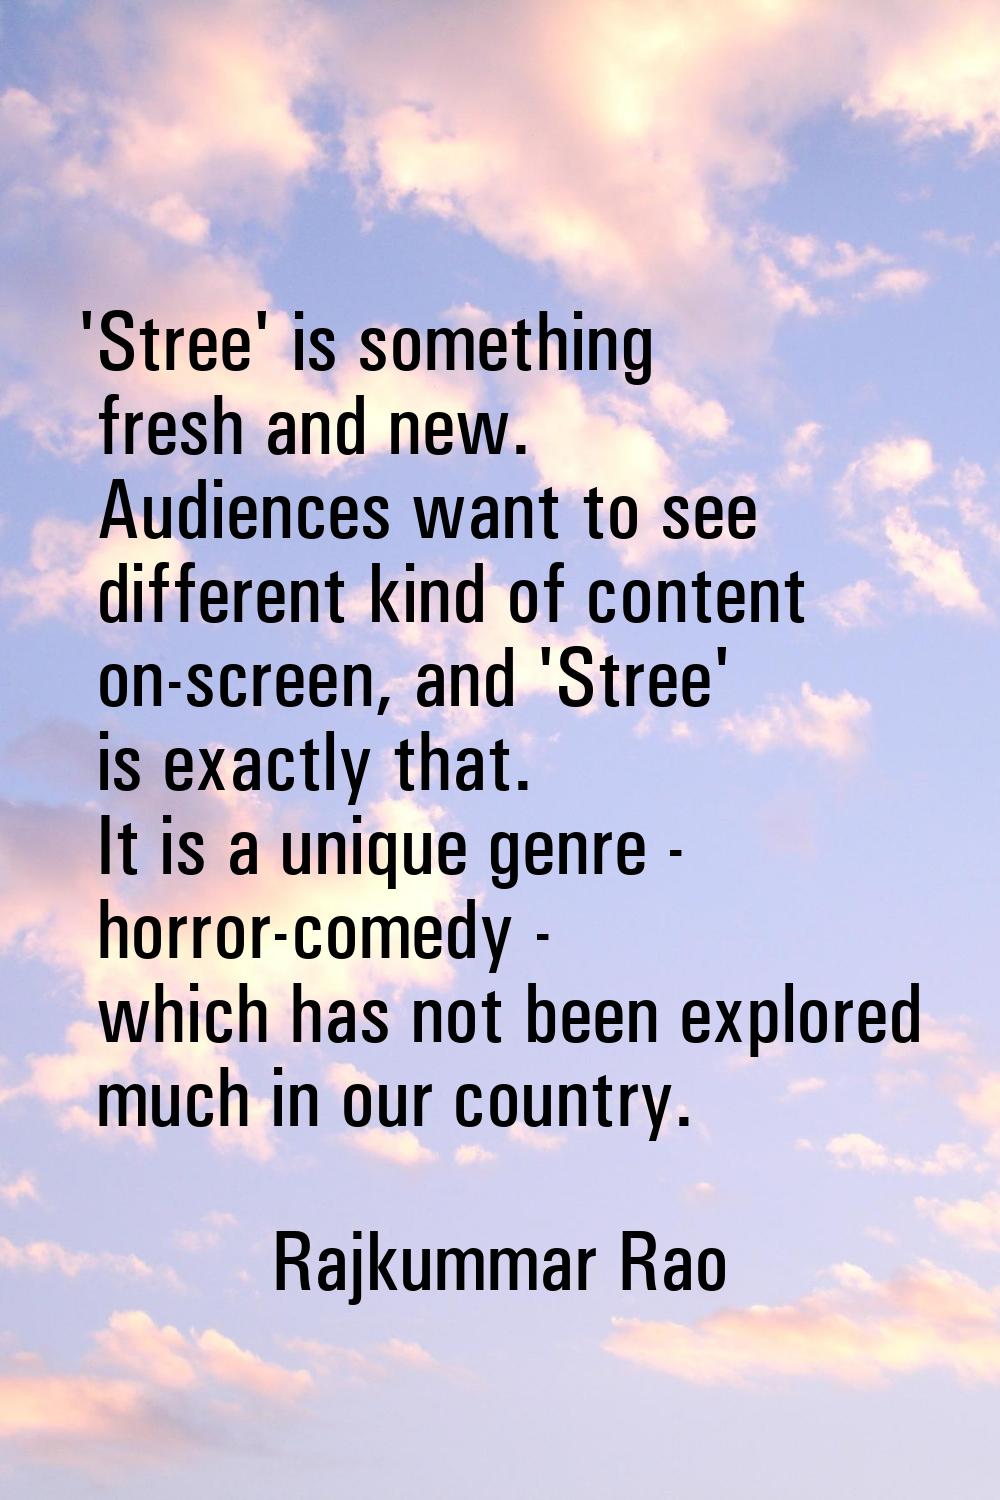 'Stree' is something fresh and new. Audiences want to see different kind of content on-screen, and 